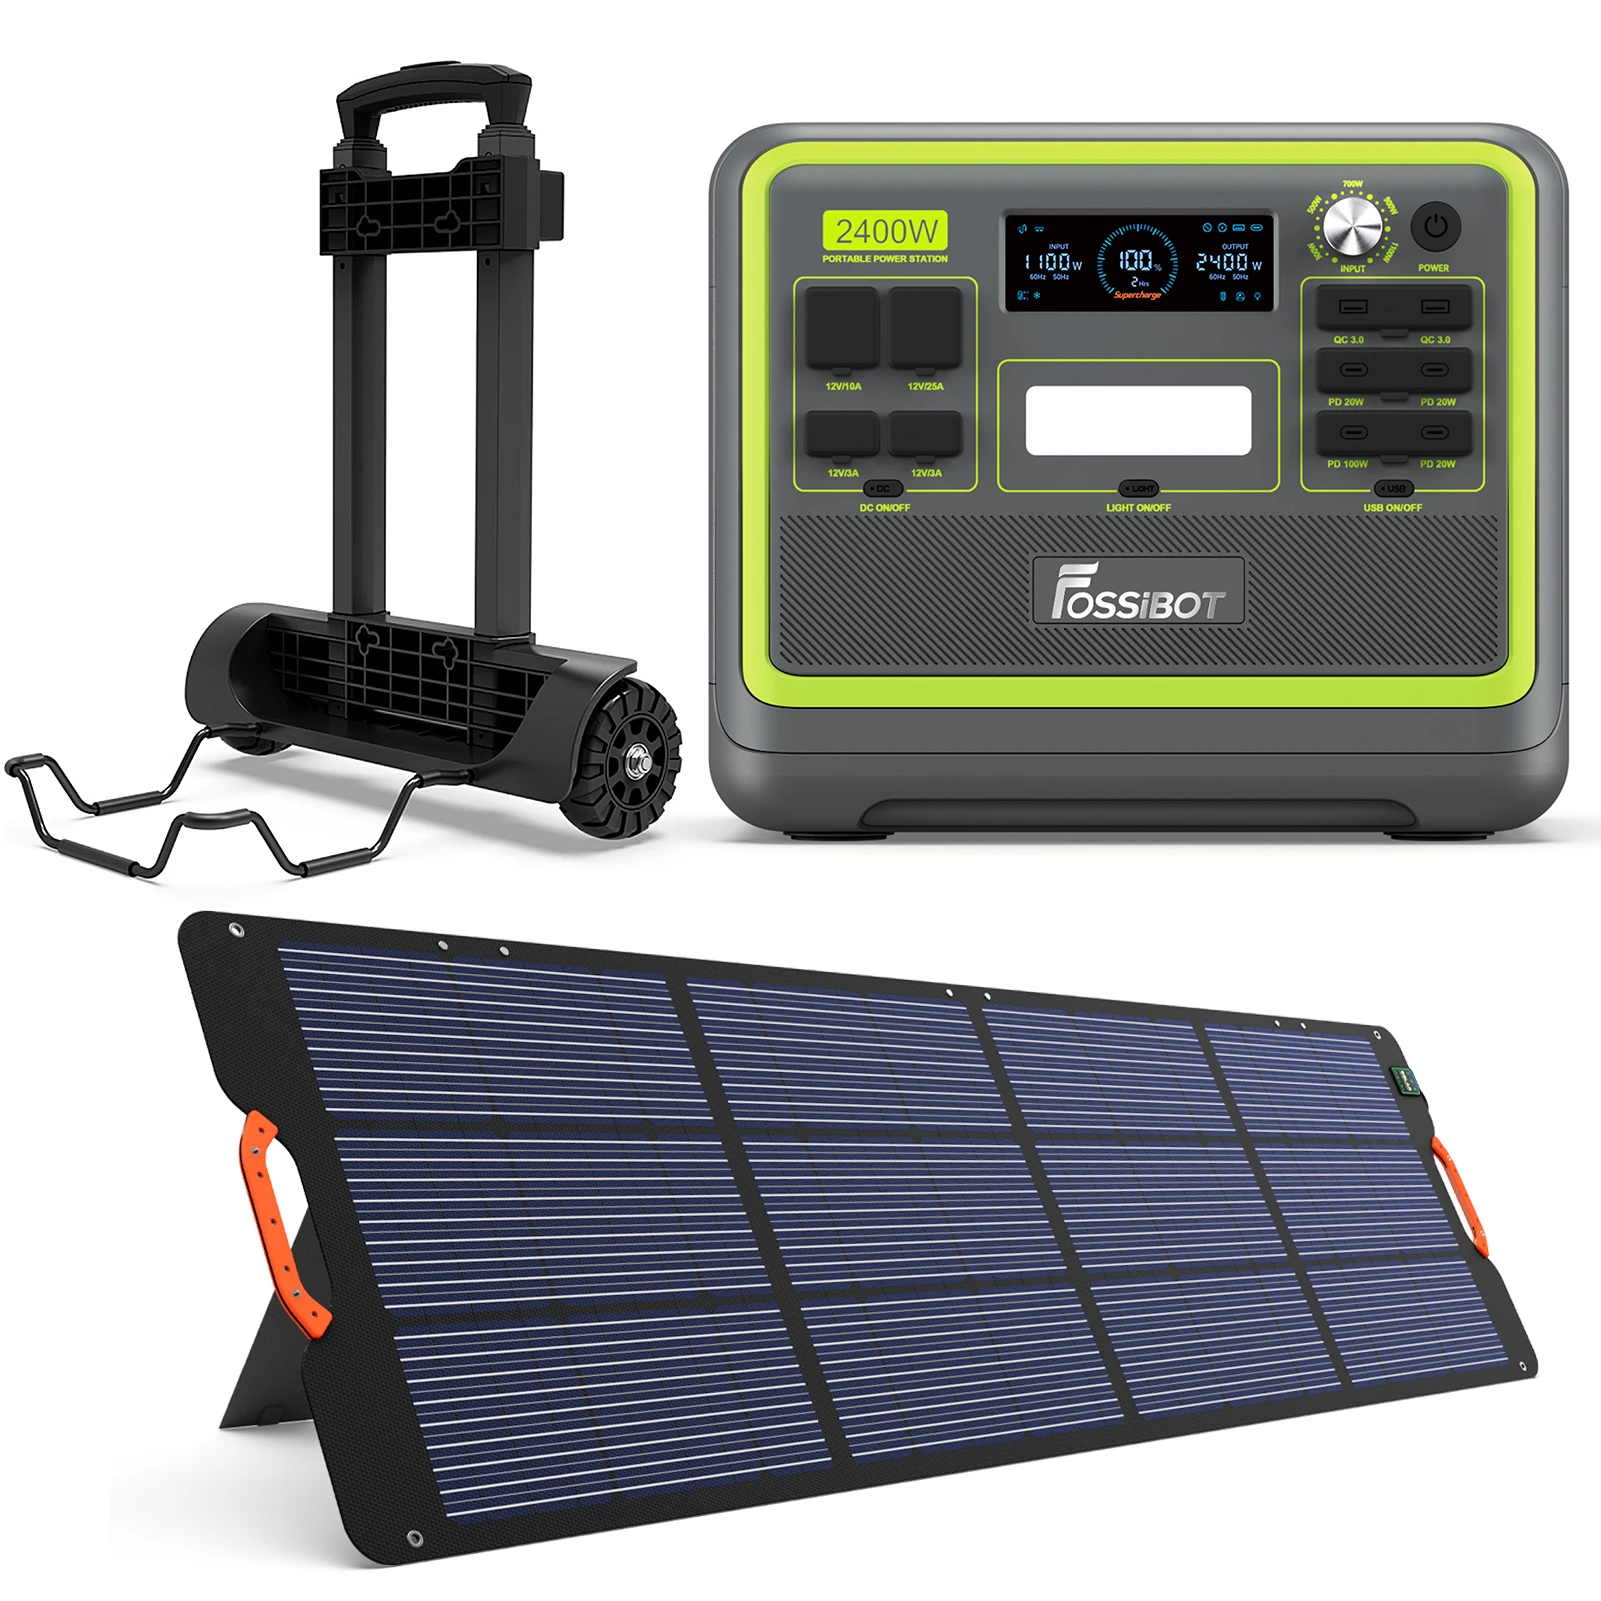 Fossibot F2400 2400W Portable Power Station with SP200 200W Solar Panel + Portable Cart for Home Outdoor Camping Emergency